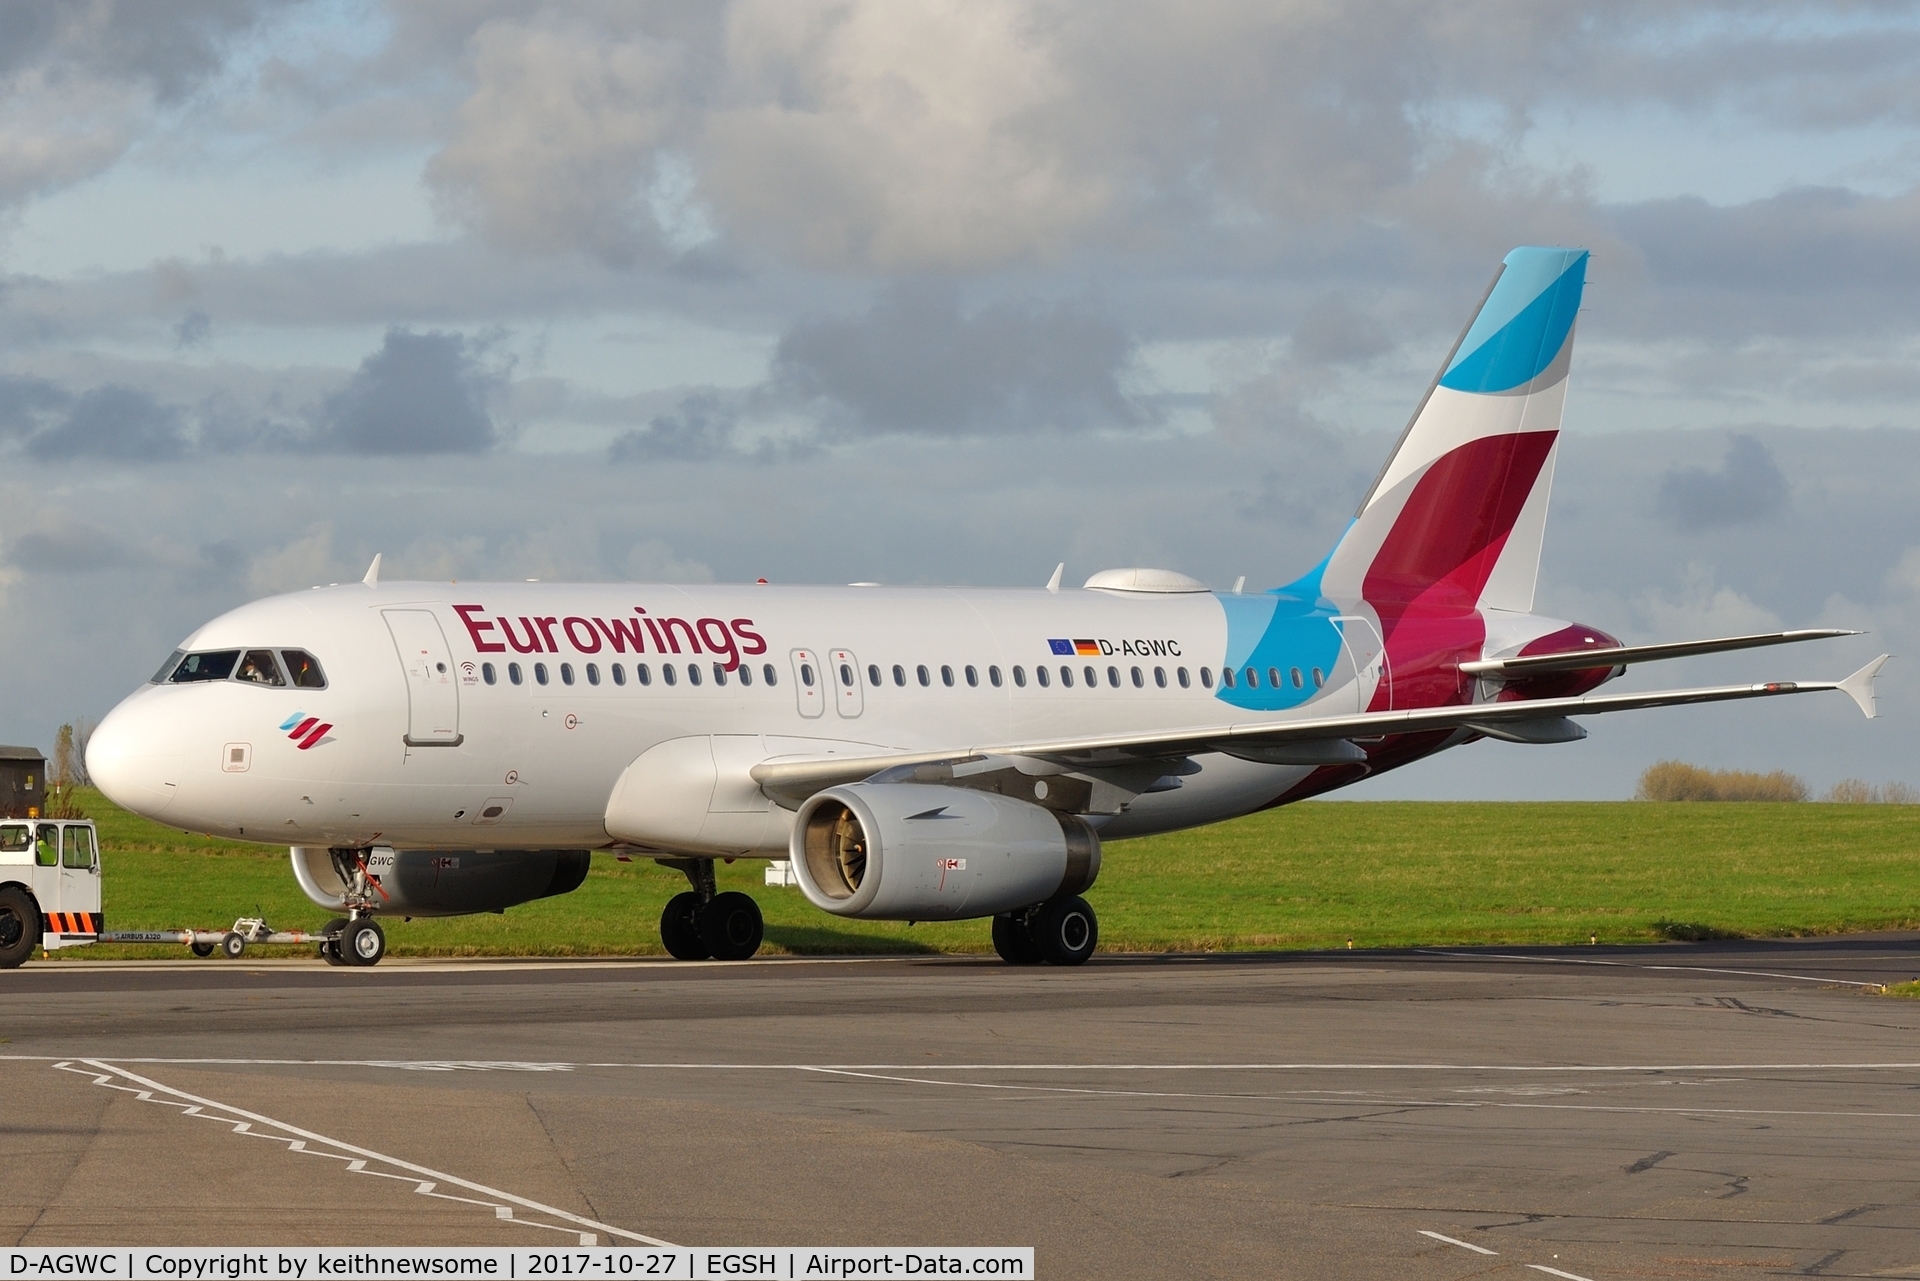 D-AGWC, 2006 Airbus A319-132 C/N 2976, Towed from spray shop with Eurowings colour scheme.